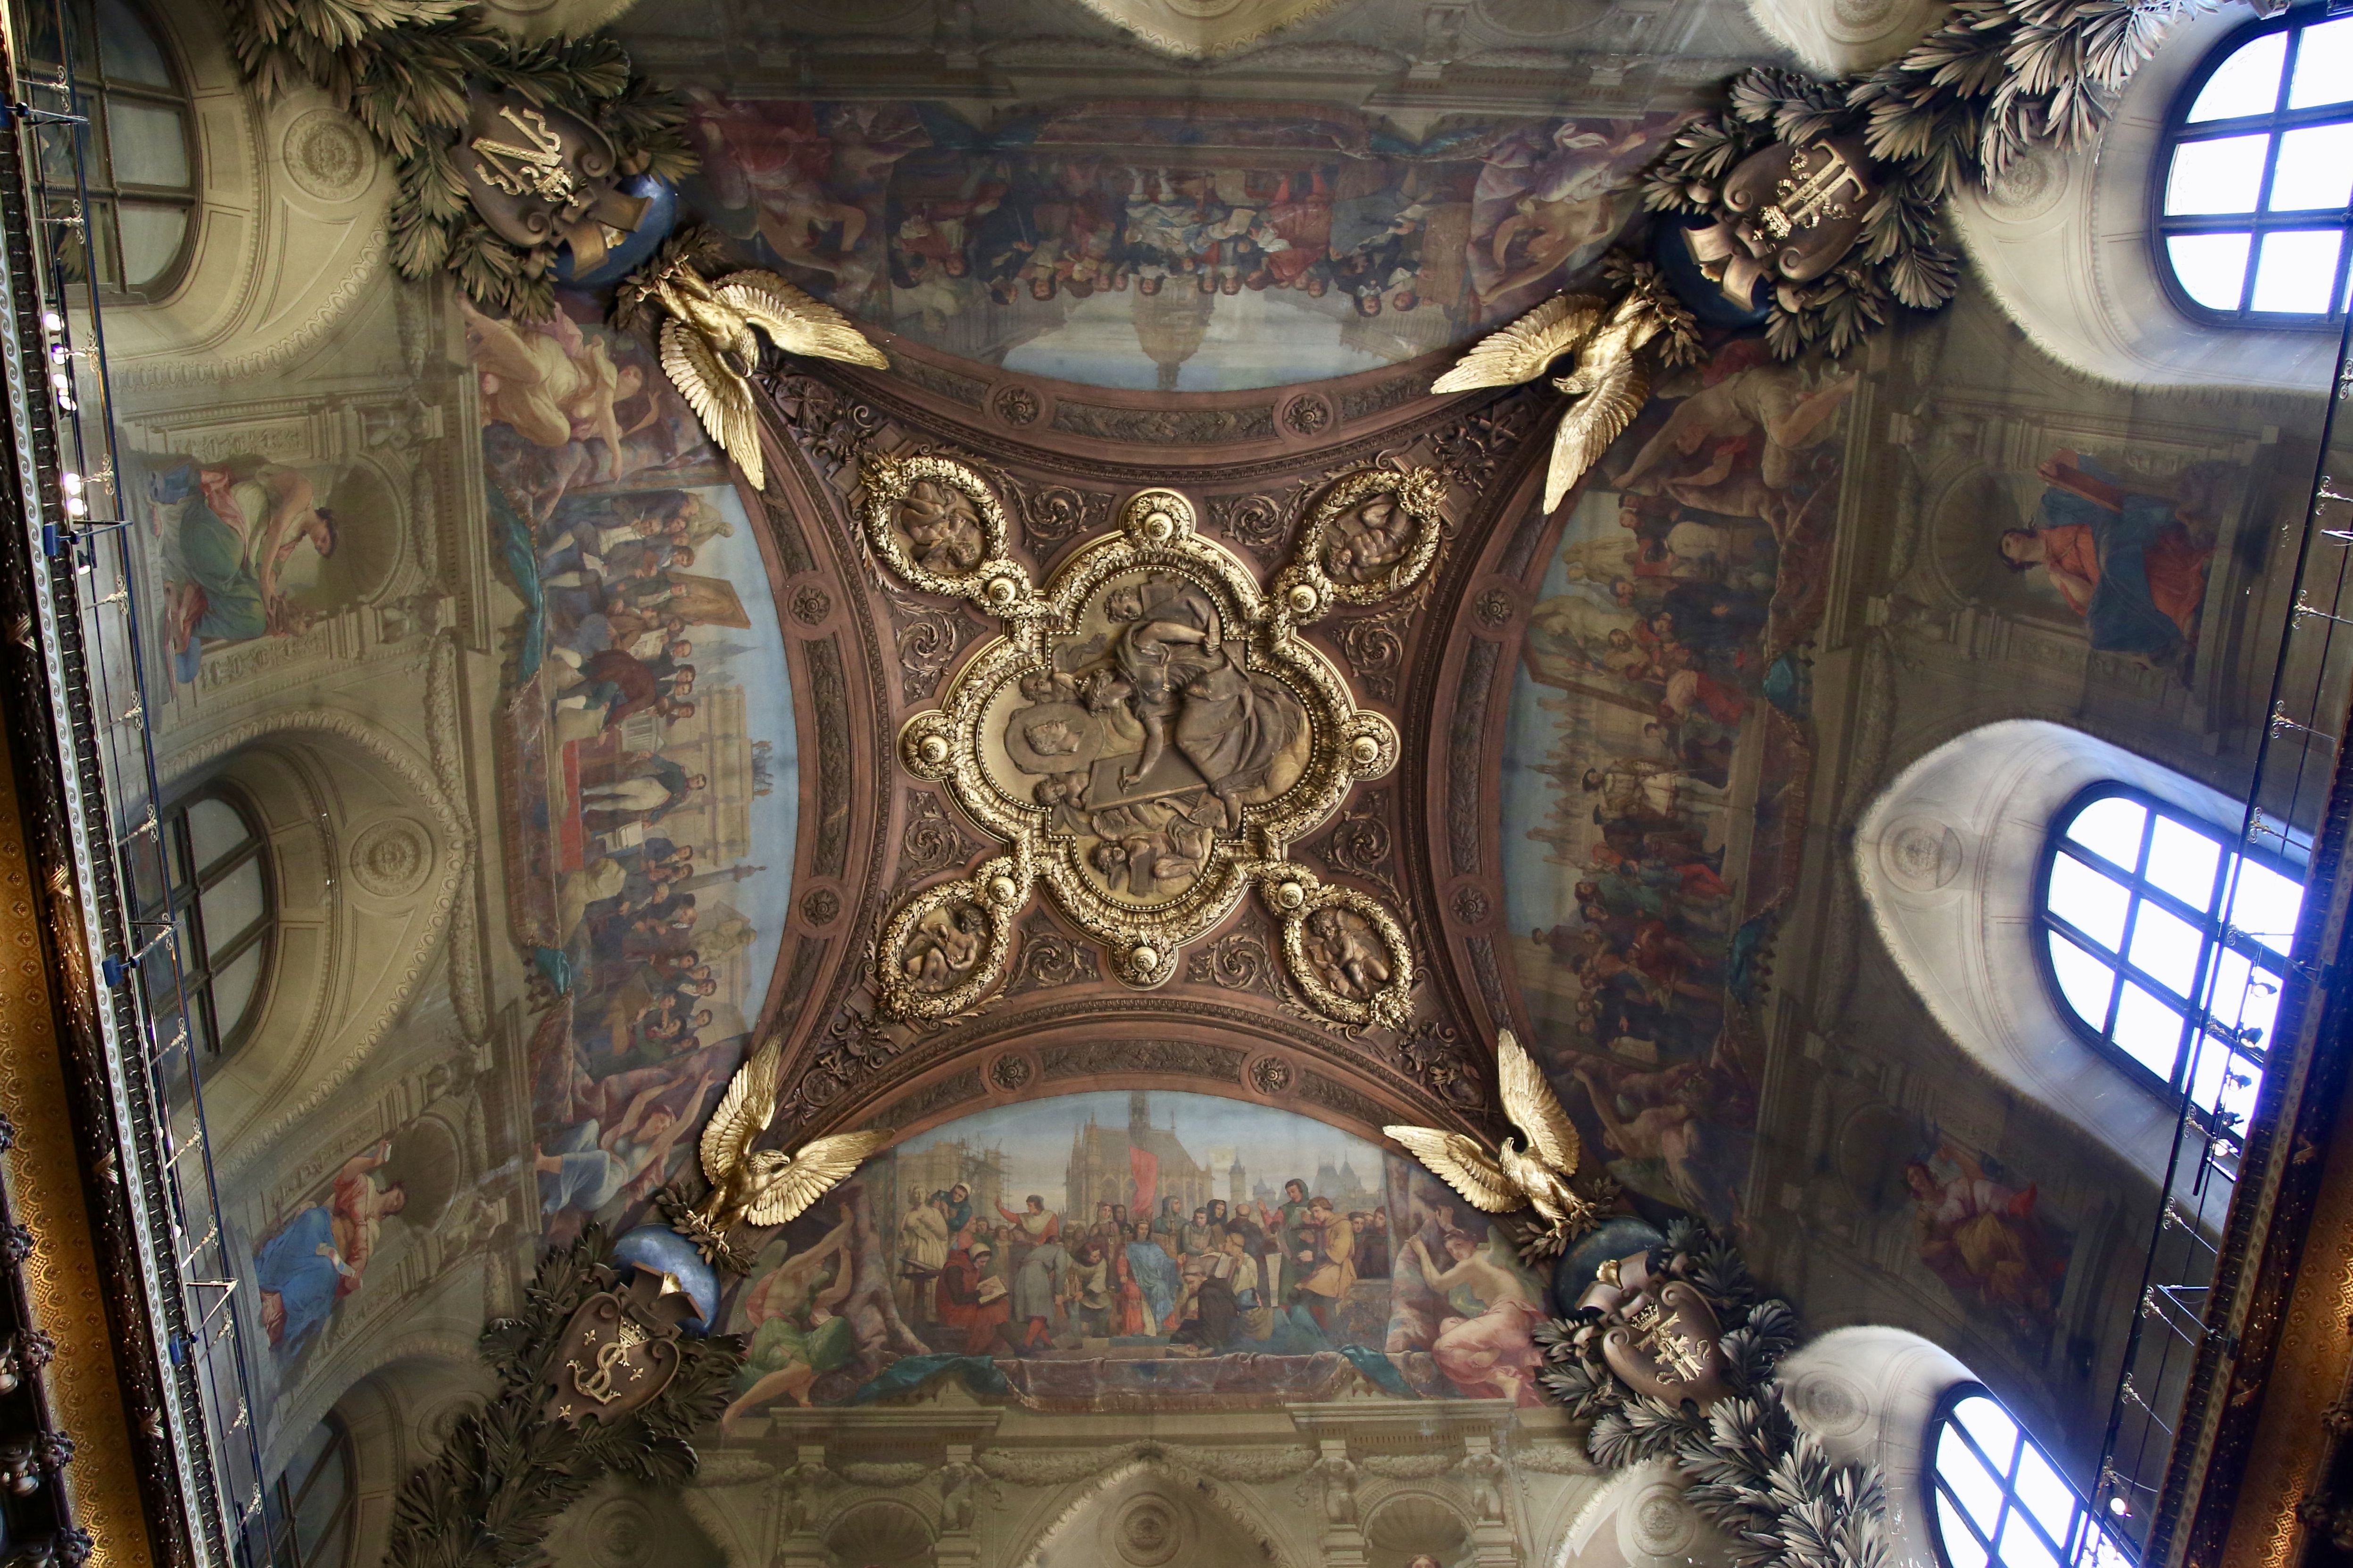 Ceiling painting in Louvre